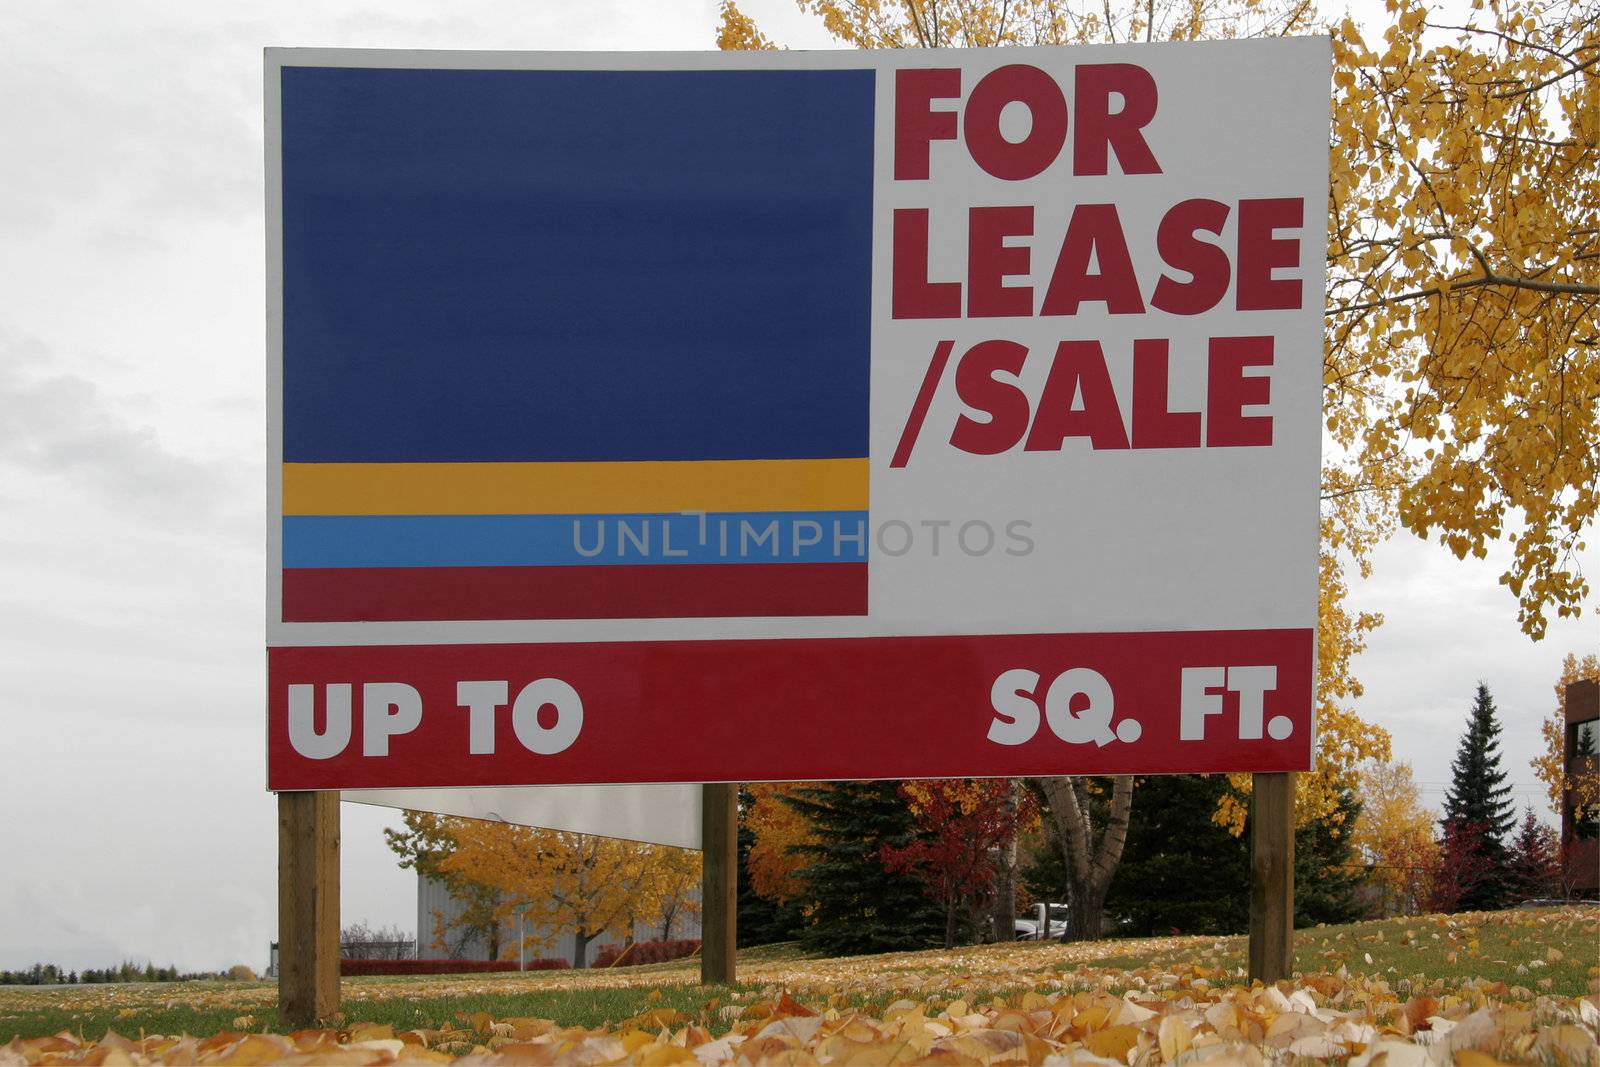 For sale/lease sing in the field